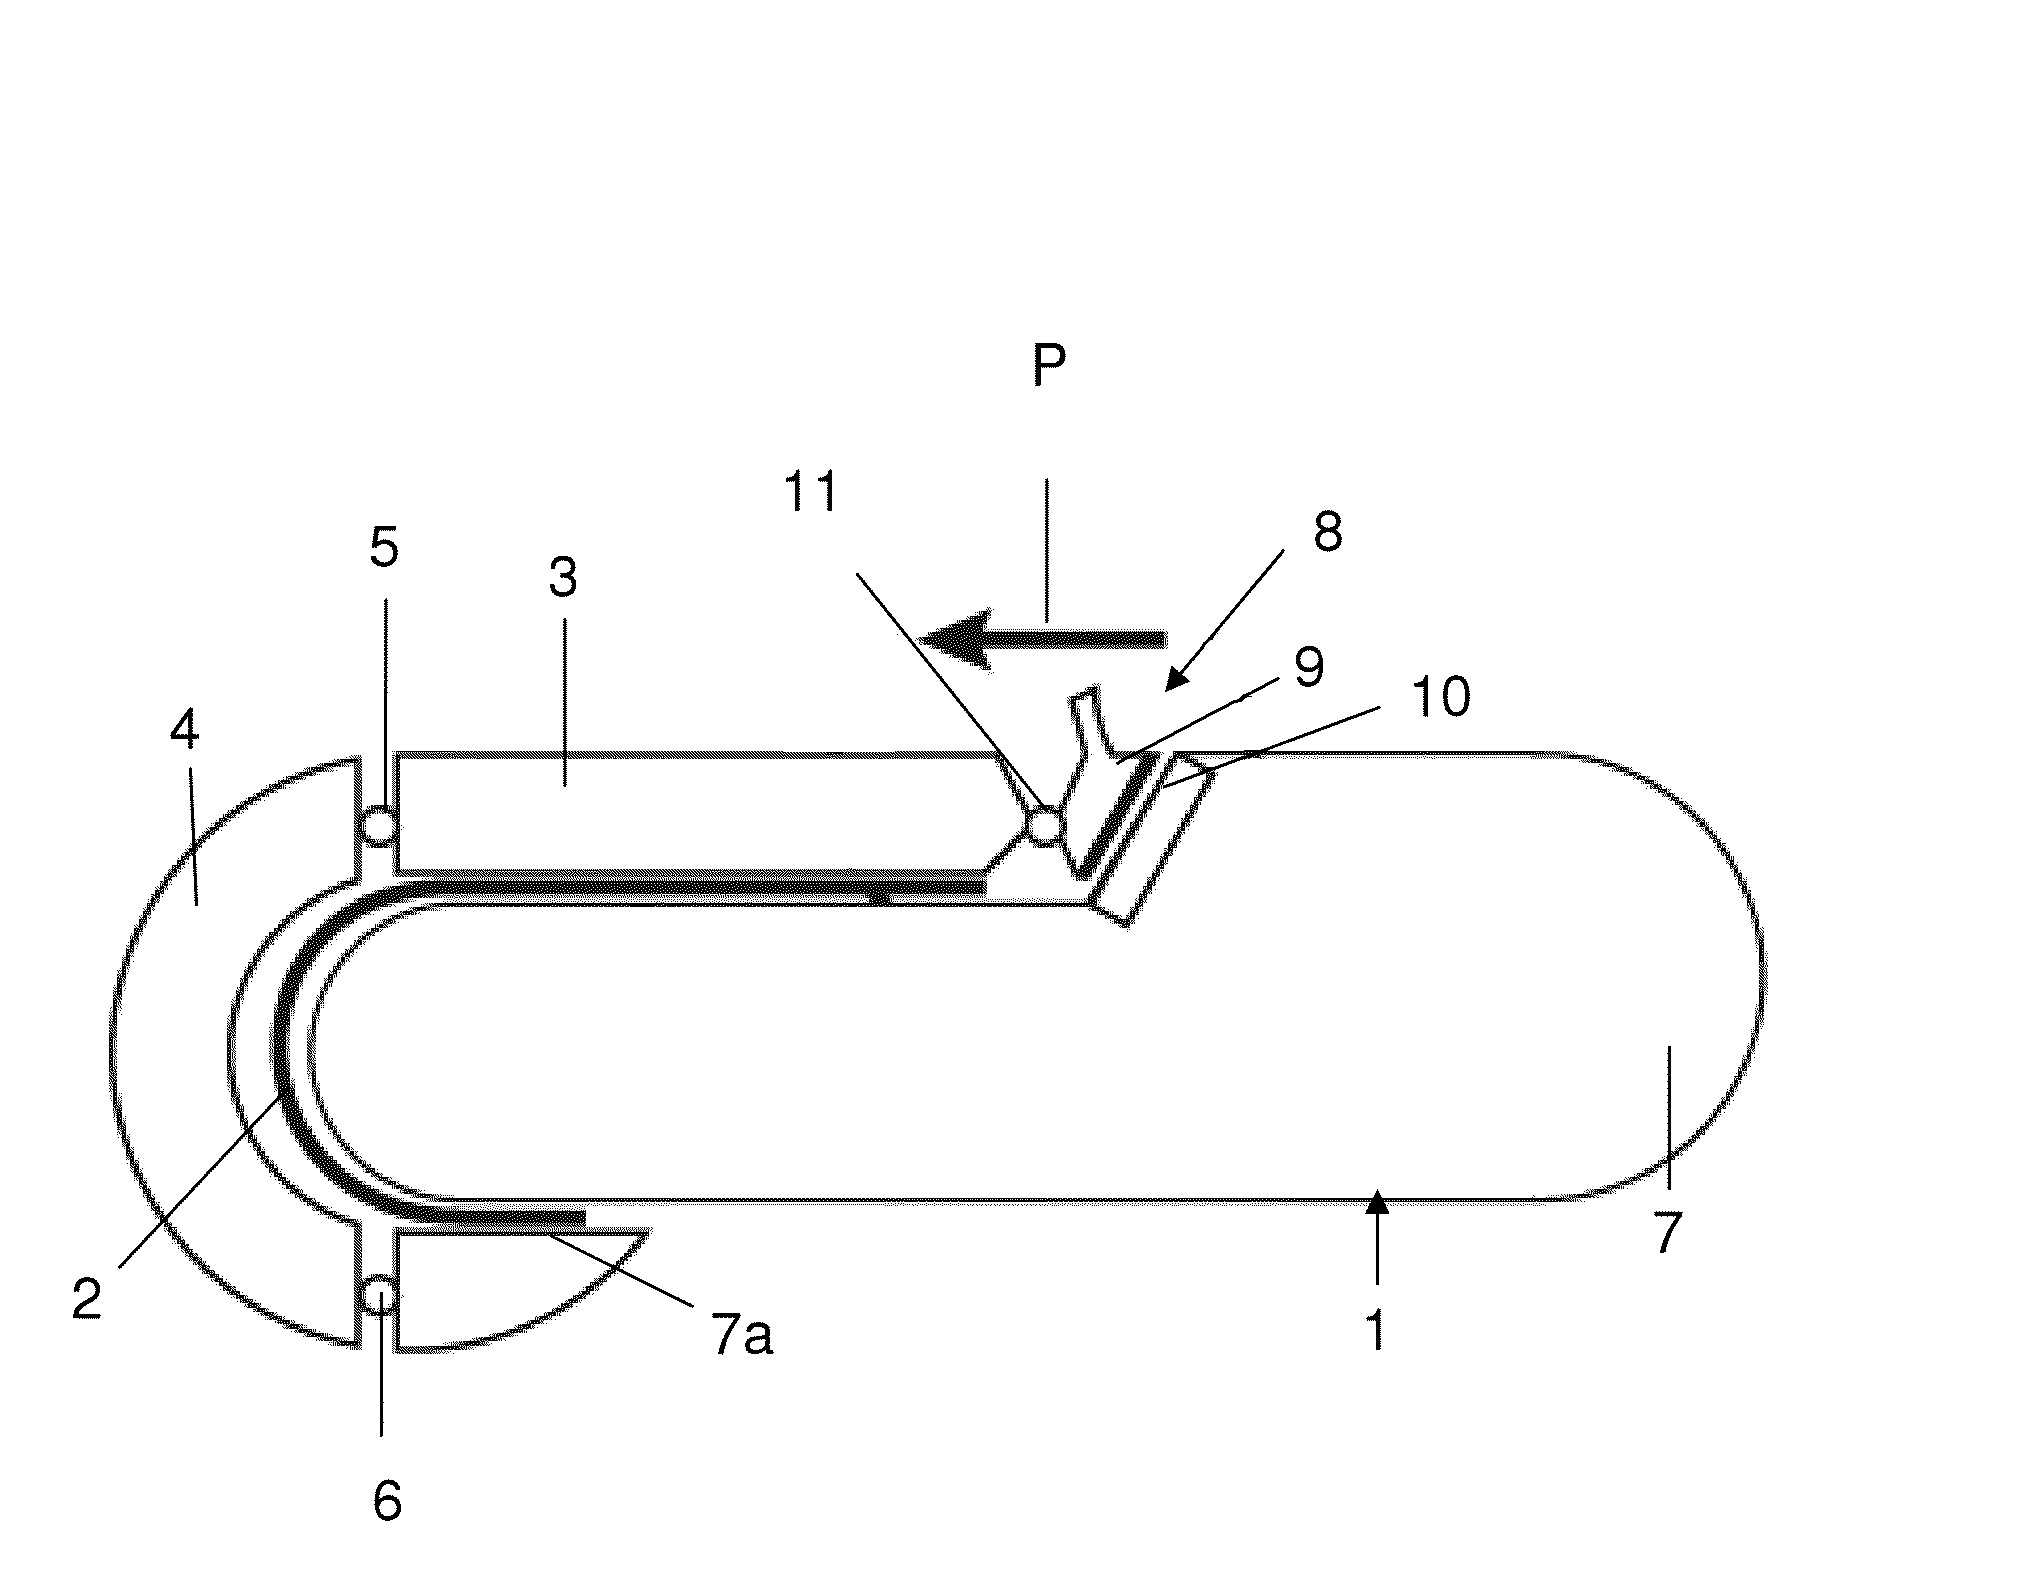 Display device with flexible display